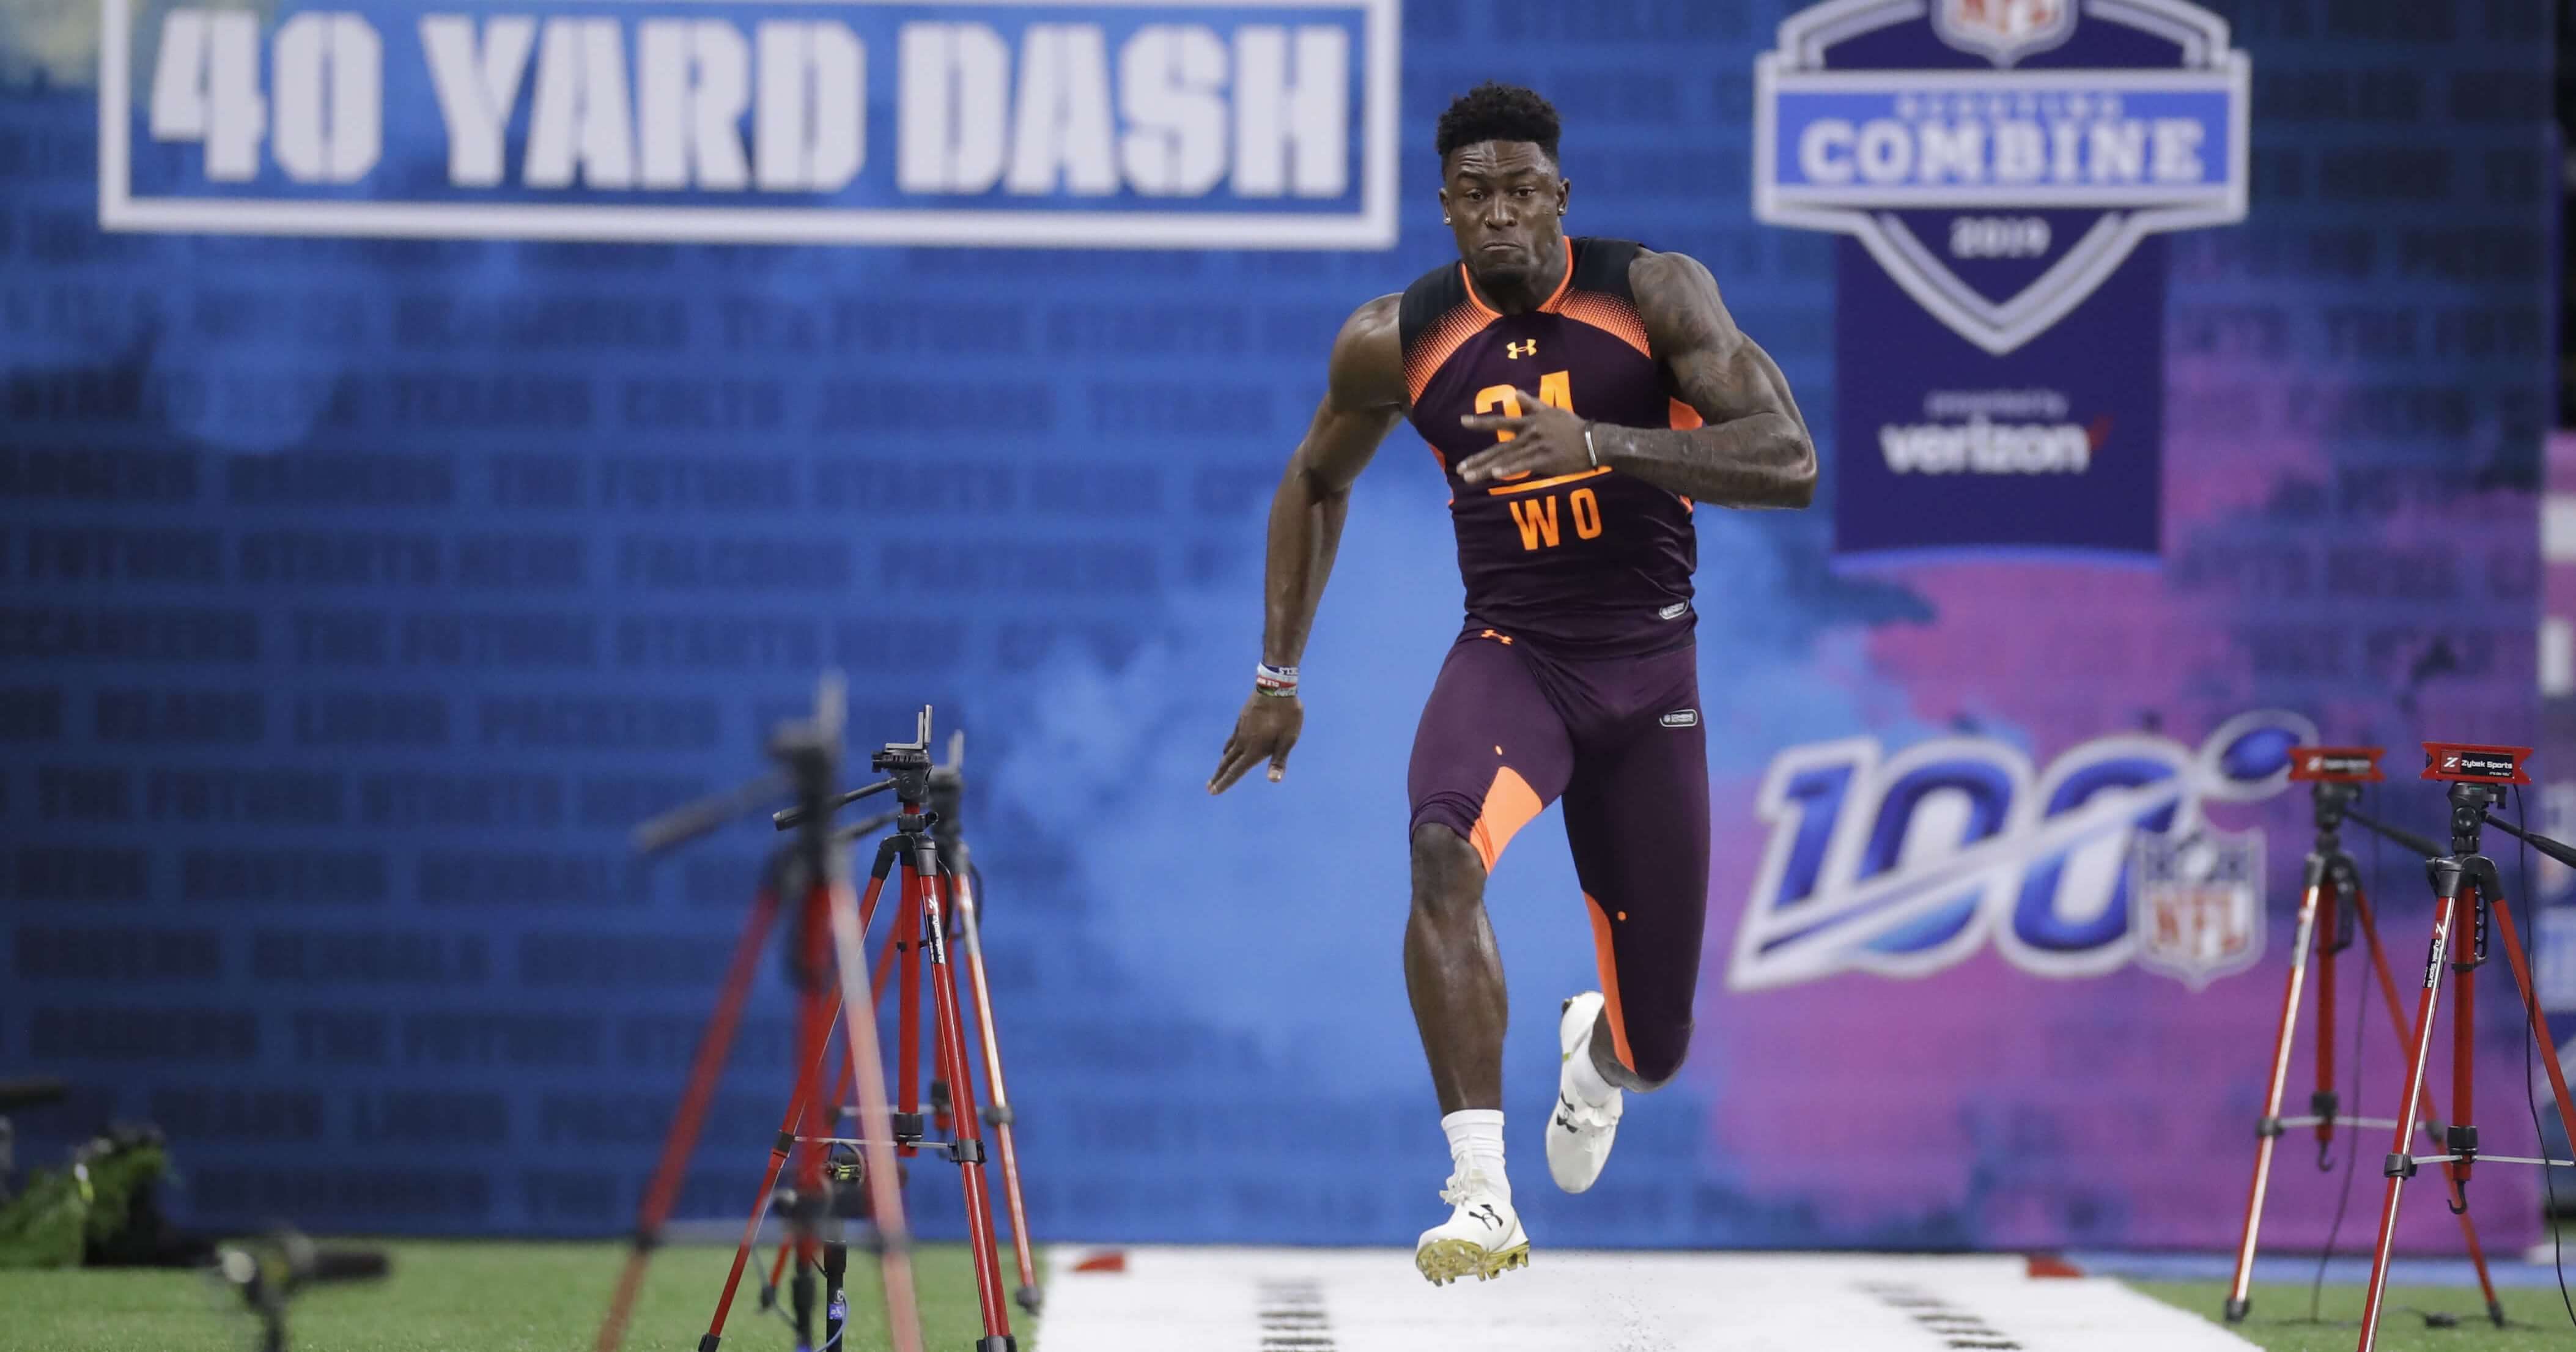 Mississippi wide receiver D.K. Metcalf runs the 40-yard dash during the NFL football scouting combine, Saturday, Mar. 2, 2019, in Indianapolis.